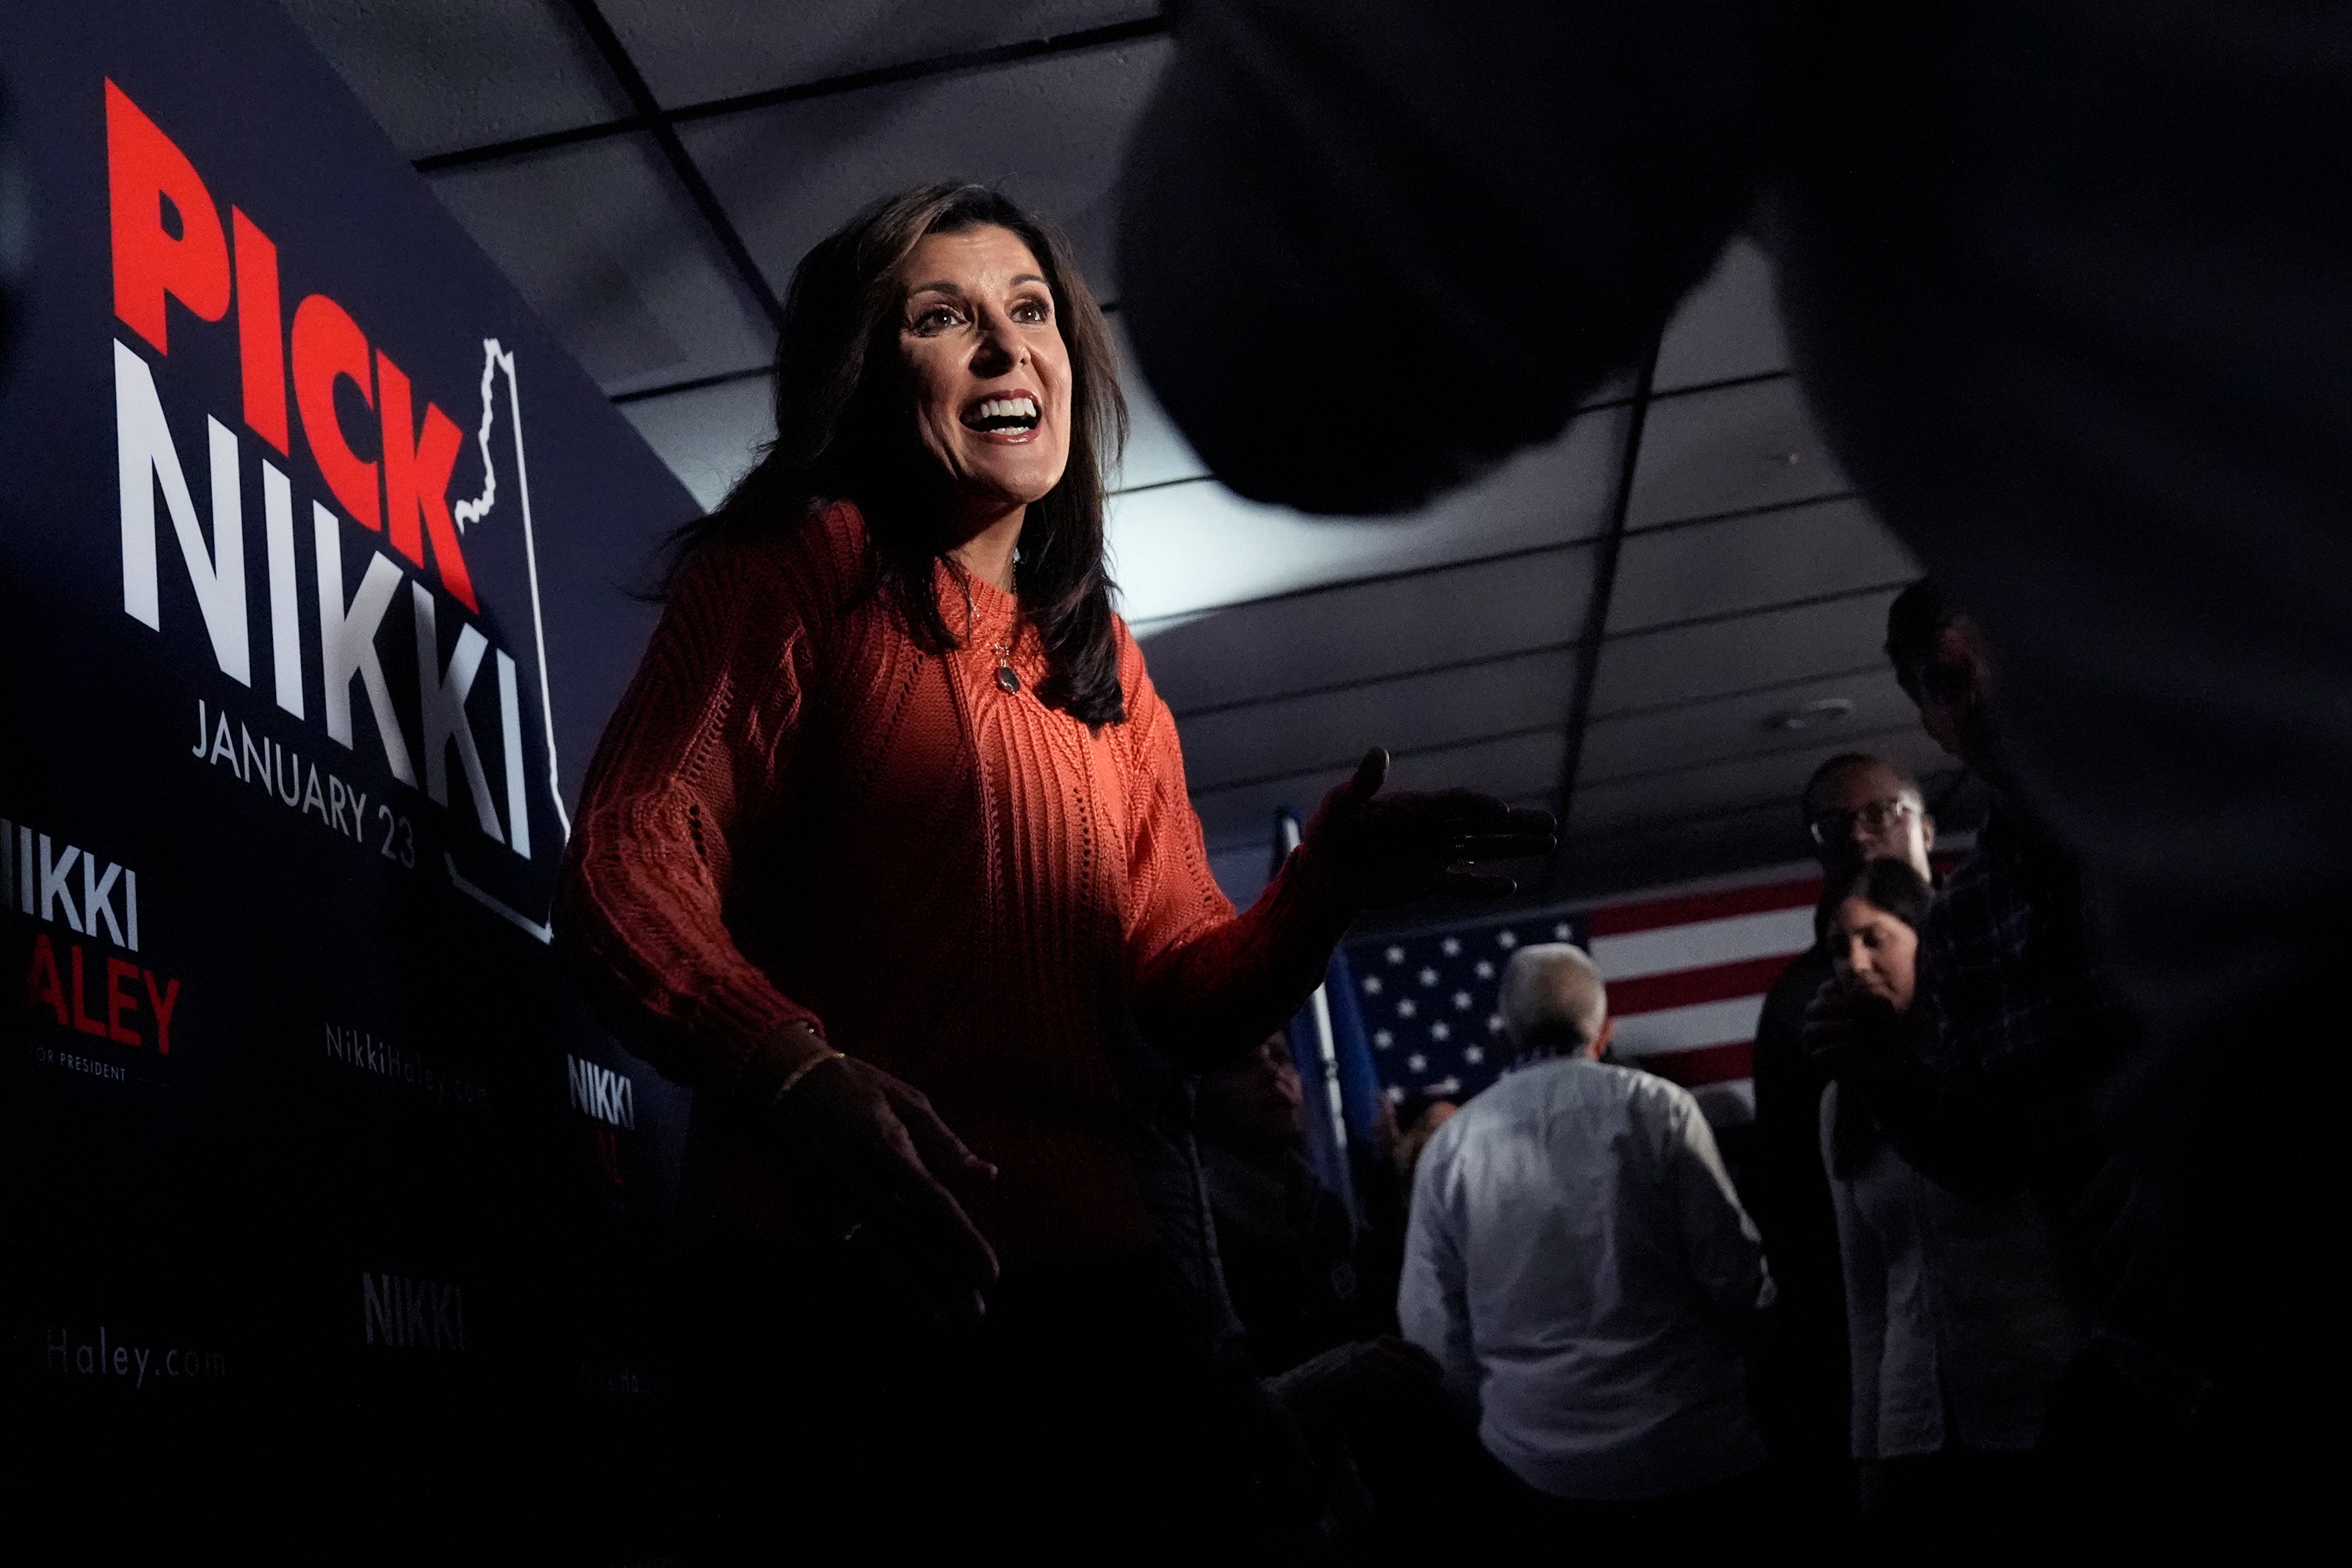 Nikki Haley appears at a campaign event in Franklin, New Hampshire